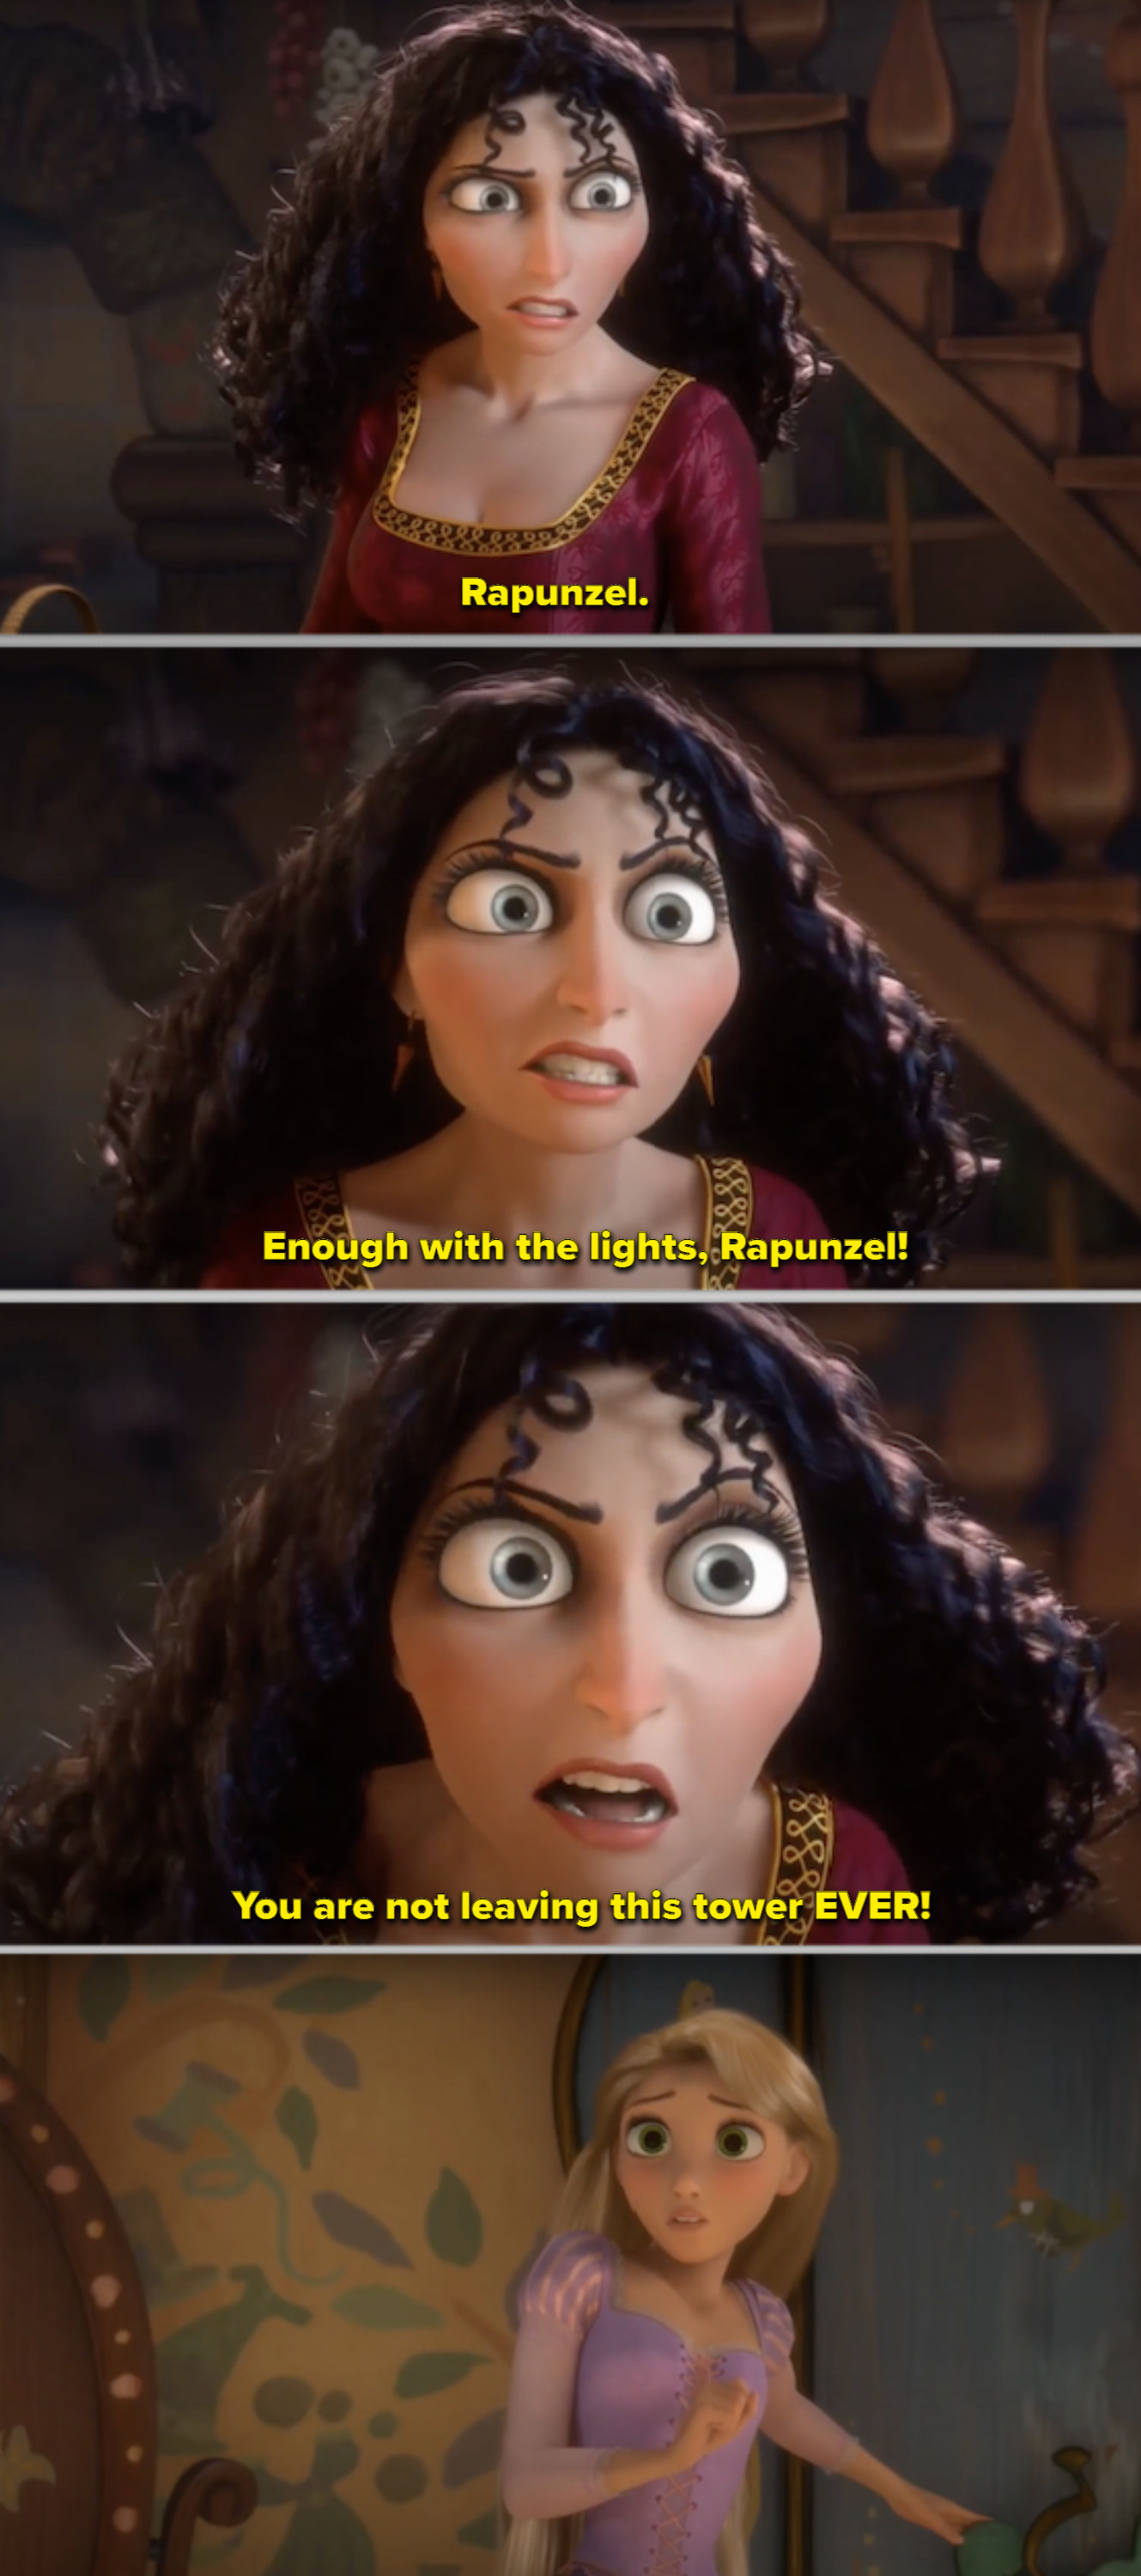 Mother Gothel yelling at Rapunzel in the tower